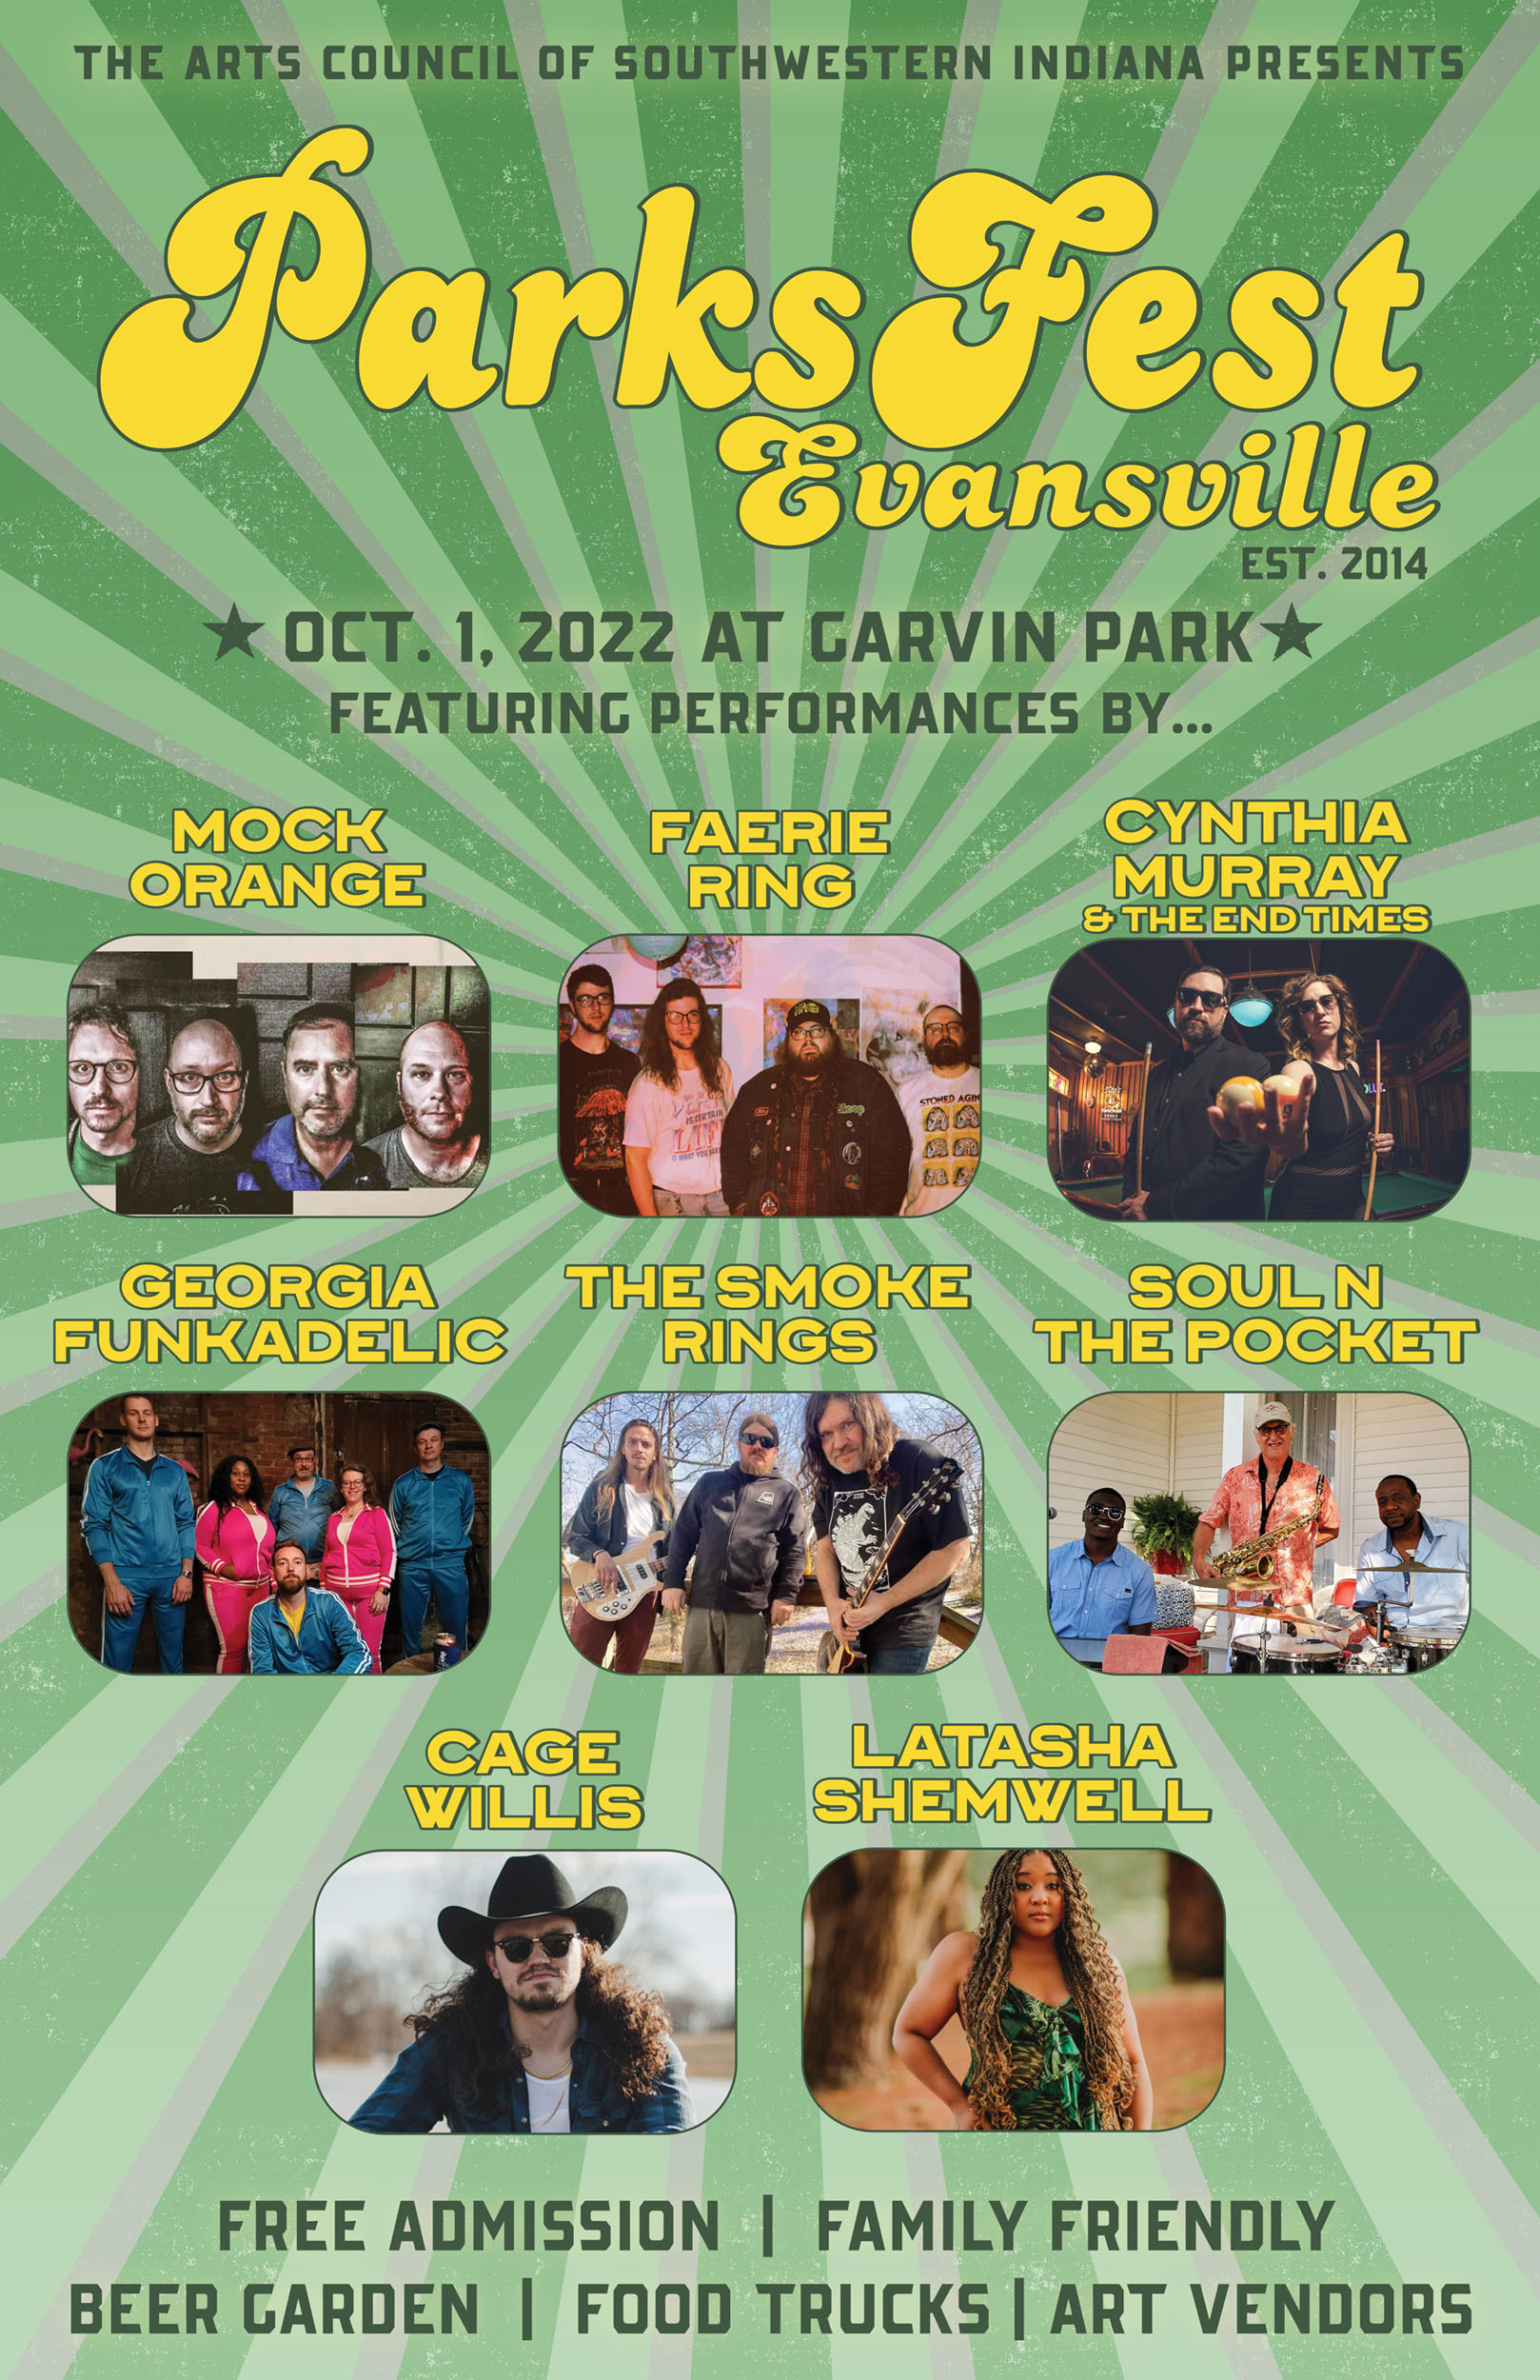 ParksFest 2022 lineup poster featuring Mock Orange, Faerie Ring, Cynthia Murray & The End Times, Georgia Funkadelic, The Smoke Rings, Soul N The Pocket, Cage Willis and LaTash Shemwell. The event features free admission, kids activities, art vendors, food trucks, and a beer garden.